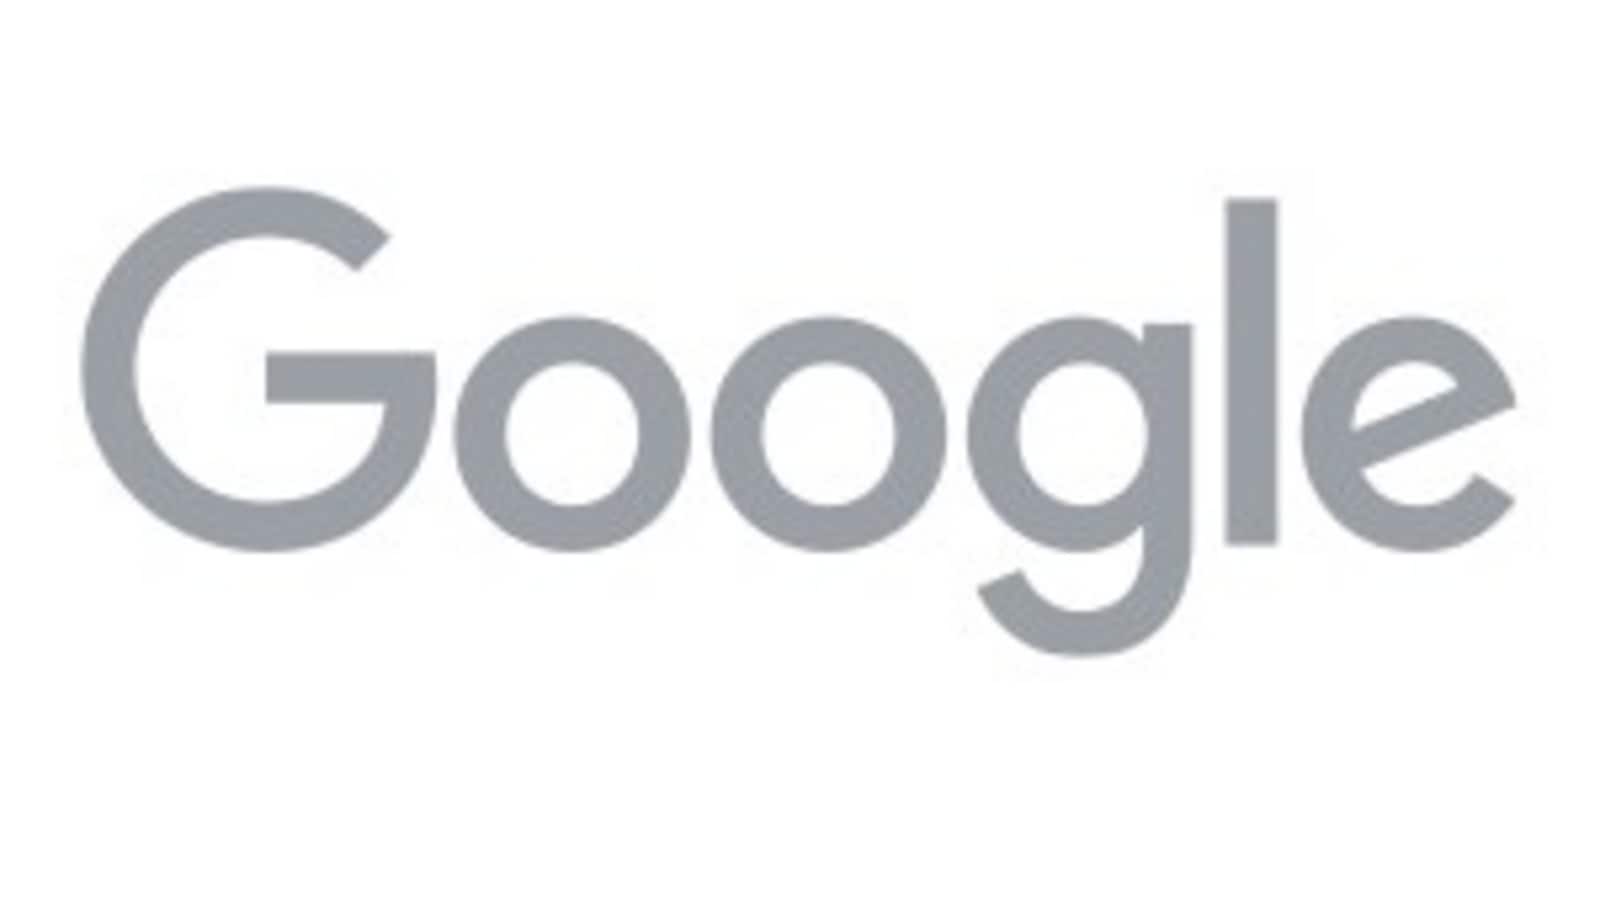 Google logo turns grey, leaving confused. It's a tribute to